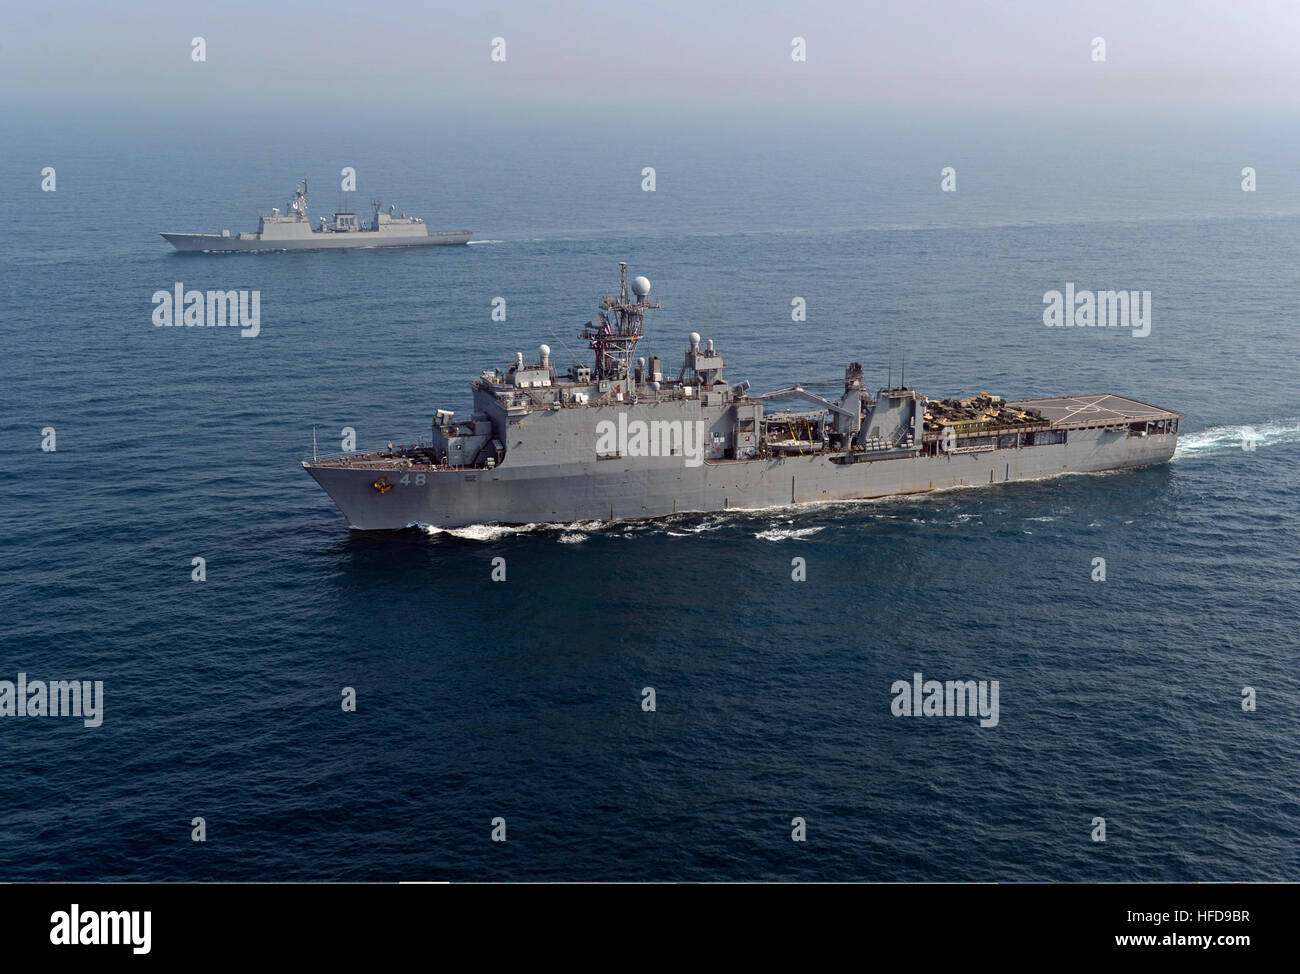 The amphibious dock landing ship USS Ashland (LSD 48), front, transits the East China Sea with the South Korean destroyer ROKS Dae Jo-yeong (DDH 977) during a photo exercise March 27, 2014. The Ashland was part of the Bonhomme Richard Amphibious Ready Group and was participating in exercise Ssang Yong 14, a combined U.S.-South Korean combat readiness and joint/combined interoperability exercise designed to advance South Korean command and control capabilities through amphibious operations. (U.S. Navy photo by Mass Communication Specialist 2nd Class Michael Achterling/Released) The amphibious d Stock Photo